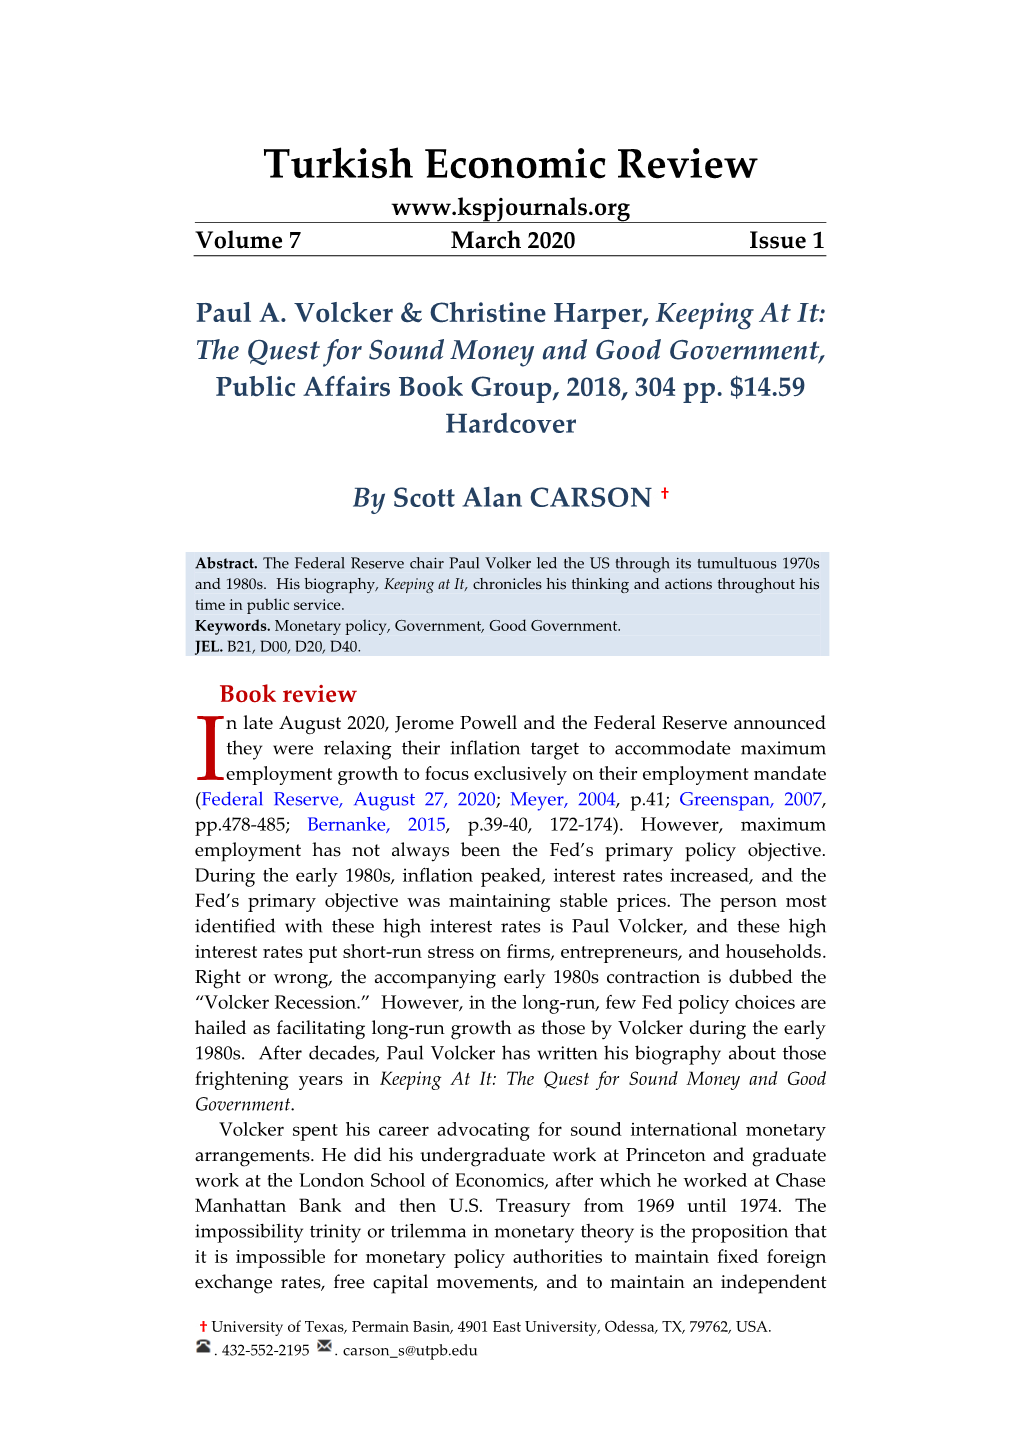 Turkish Economic Review Volume 7 March 2020 Issue 1